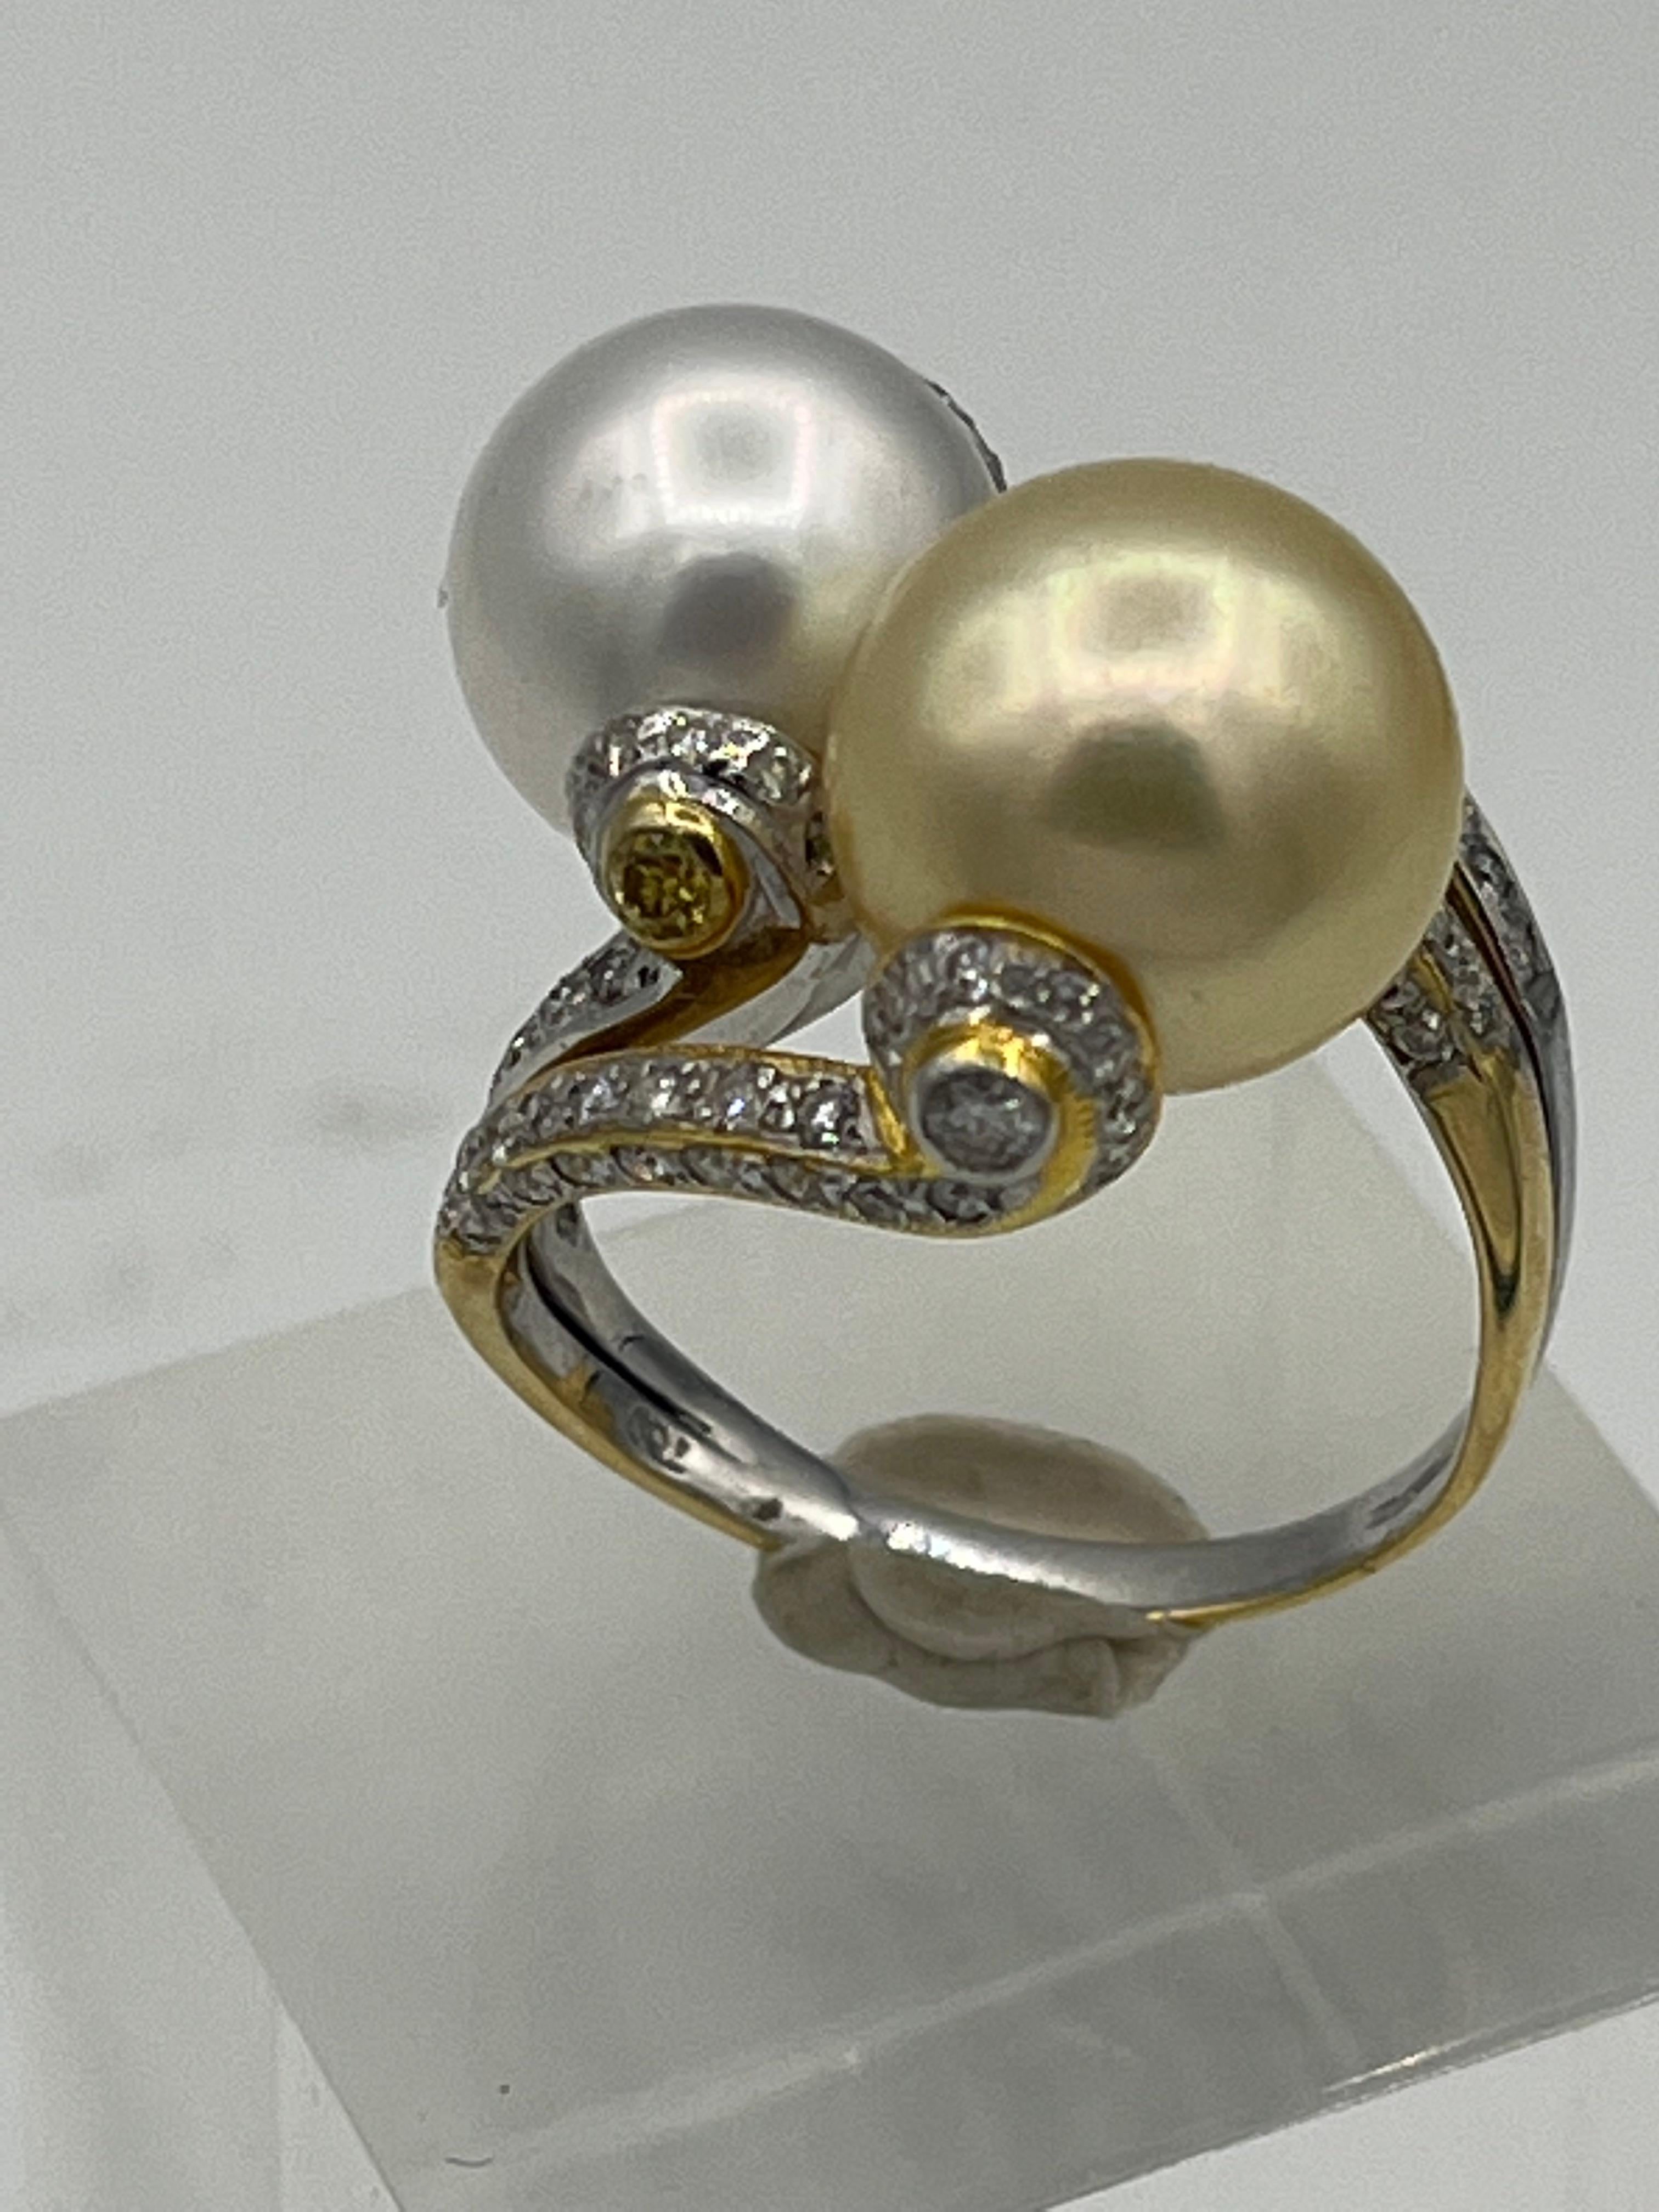 18 k white and yellow gold
hallmarked 750
2 south sea pearls diameter each 12 mm
0,80 ct diamond
size 57
11,9 gram